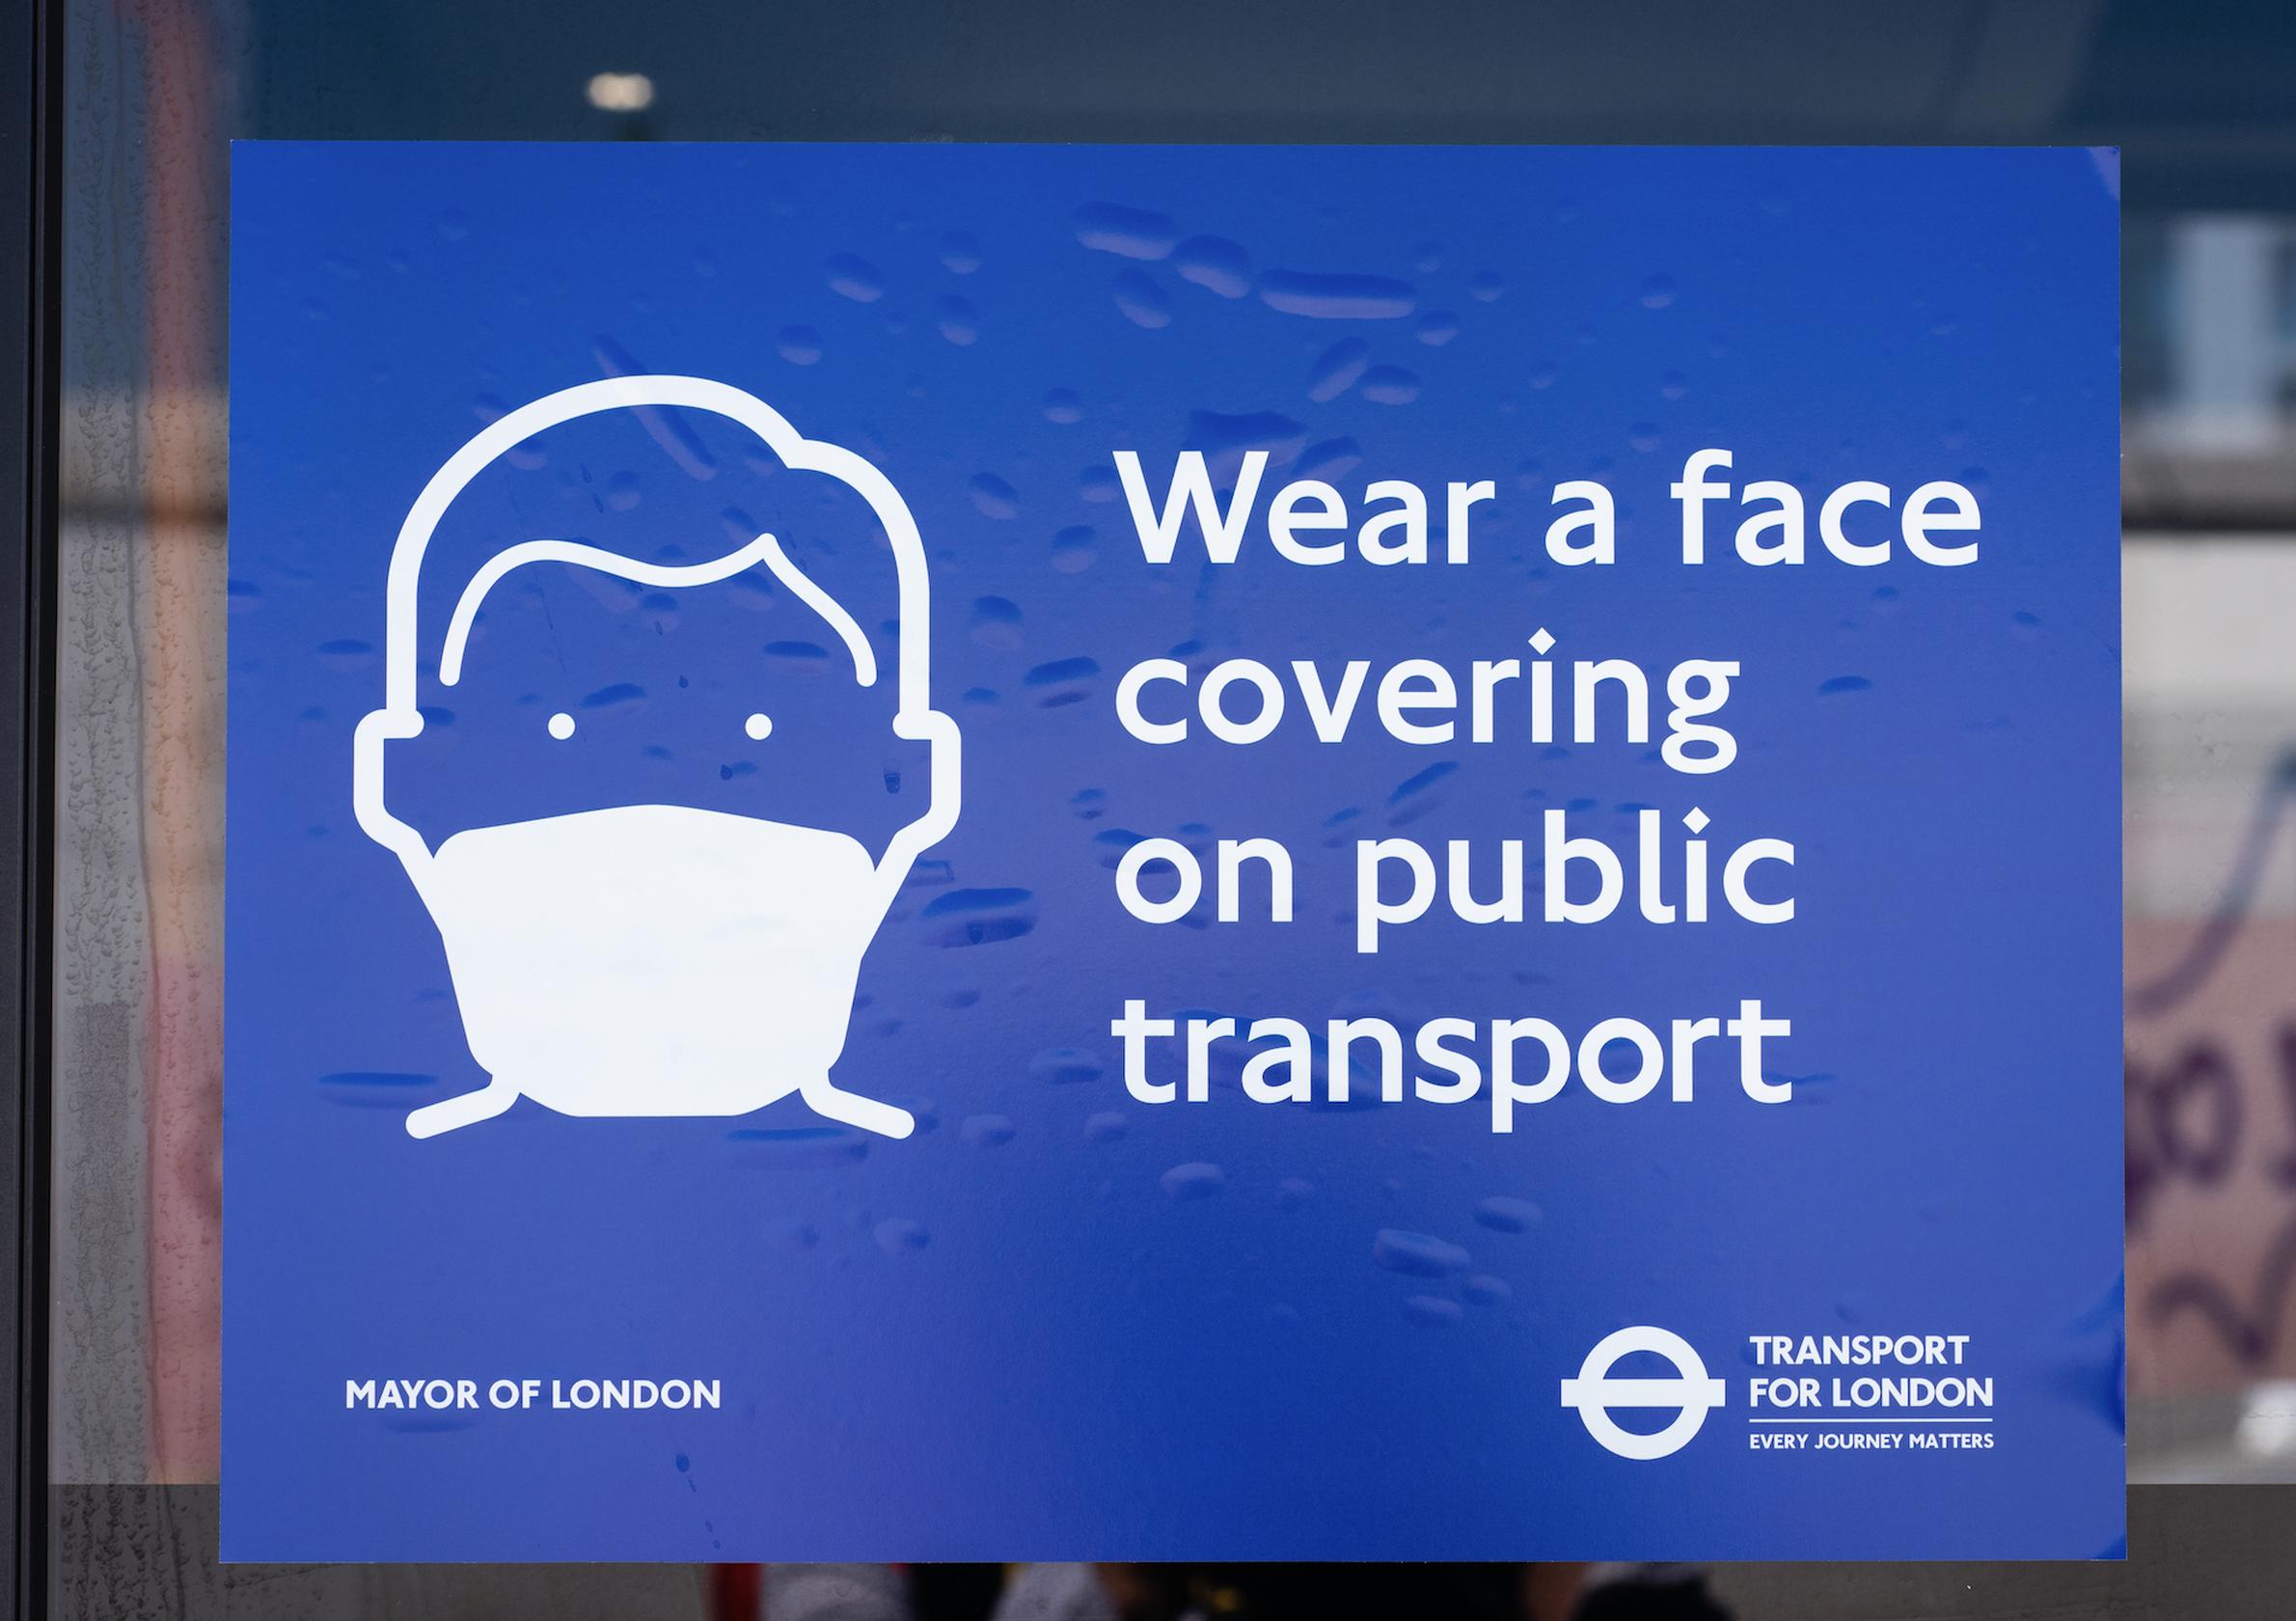 TfL will continue to instruct passenger to wear face coverings, unless they are exempt